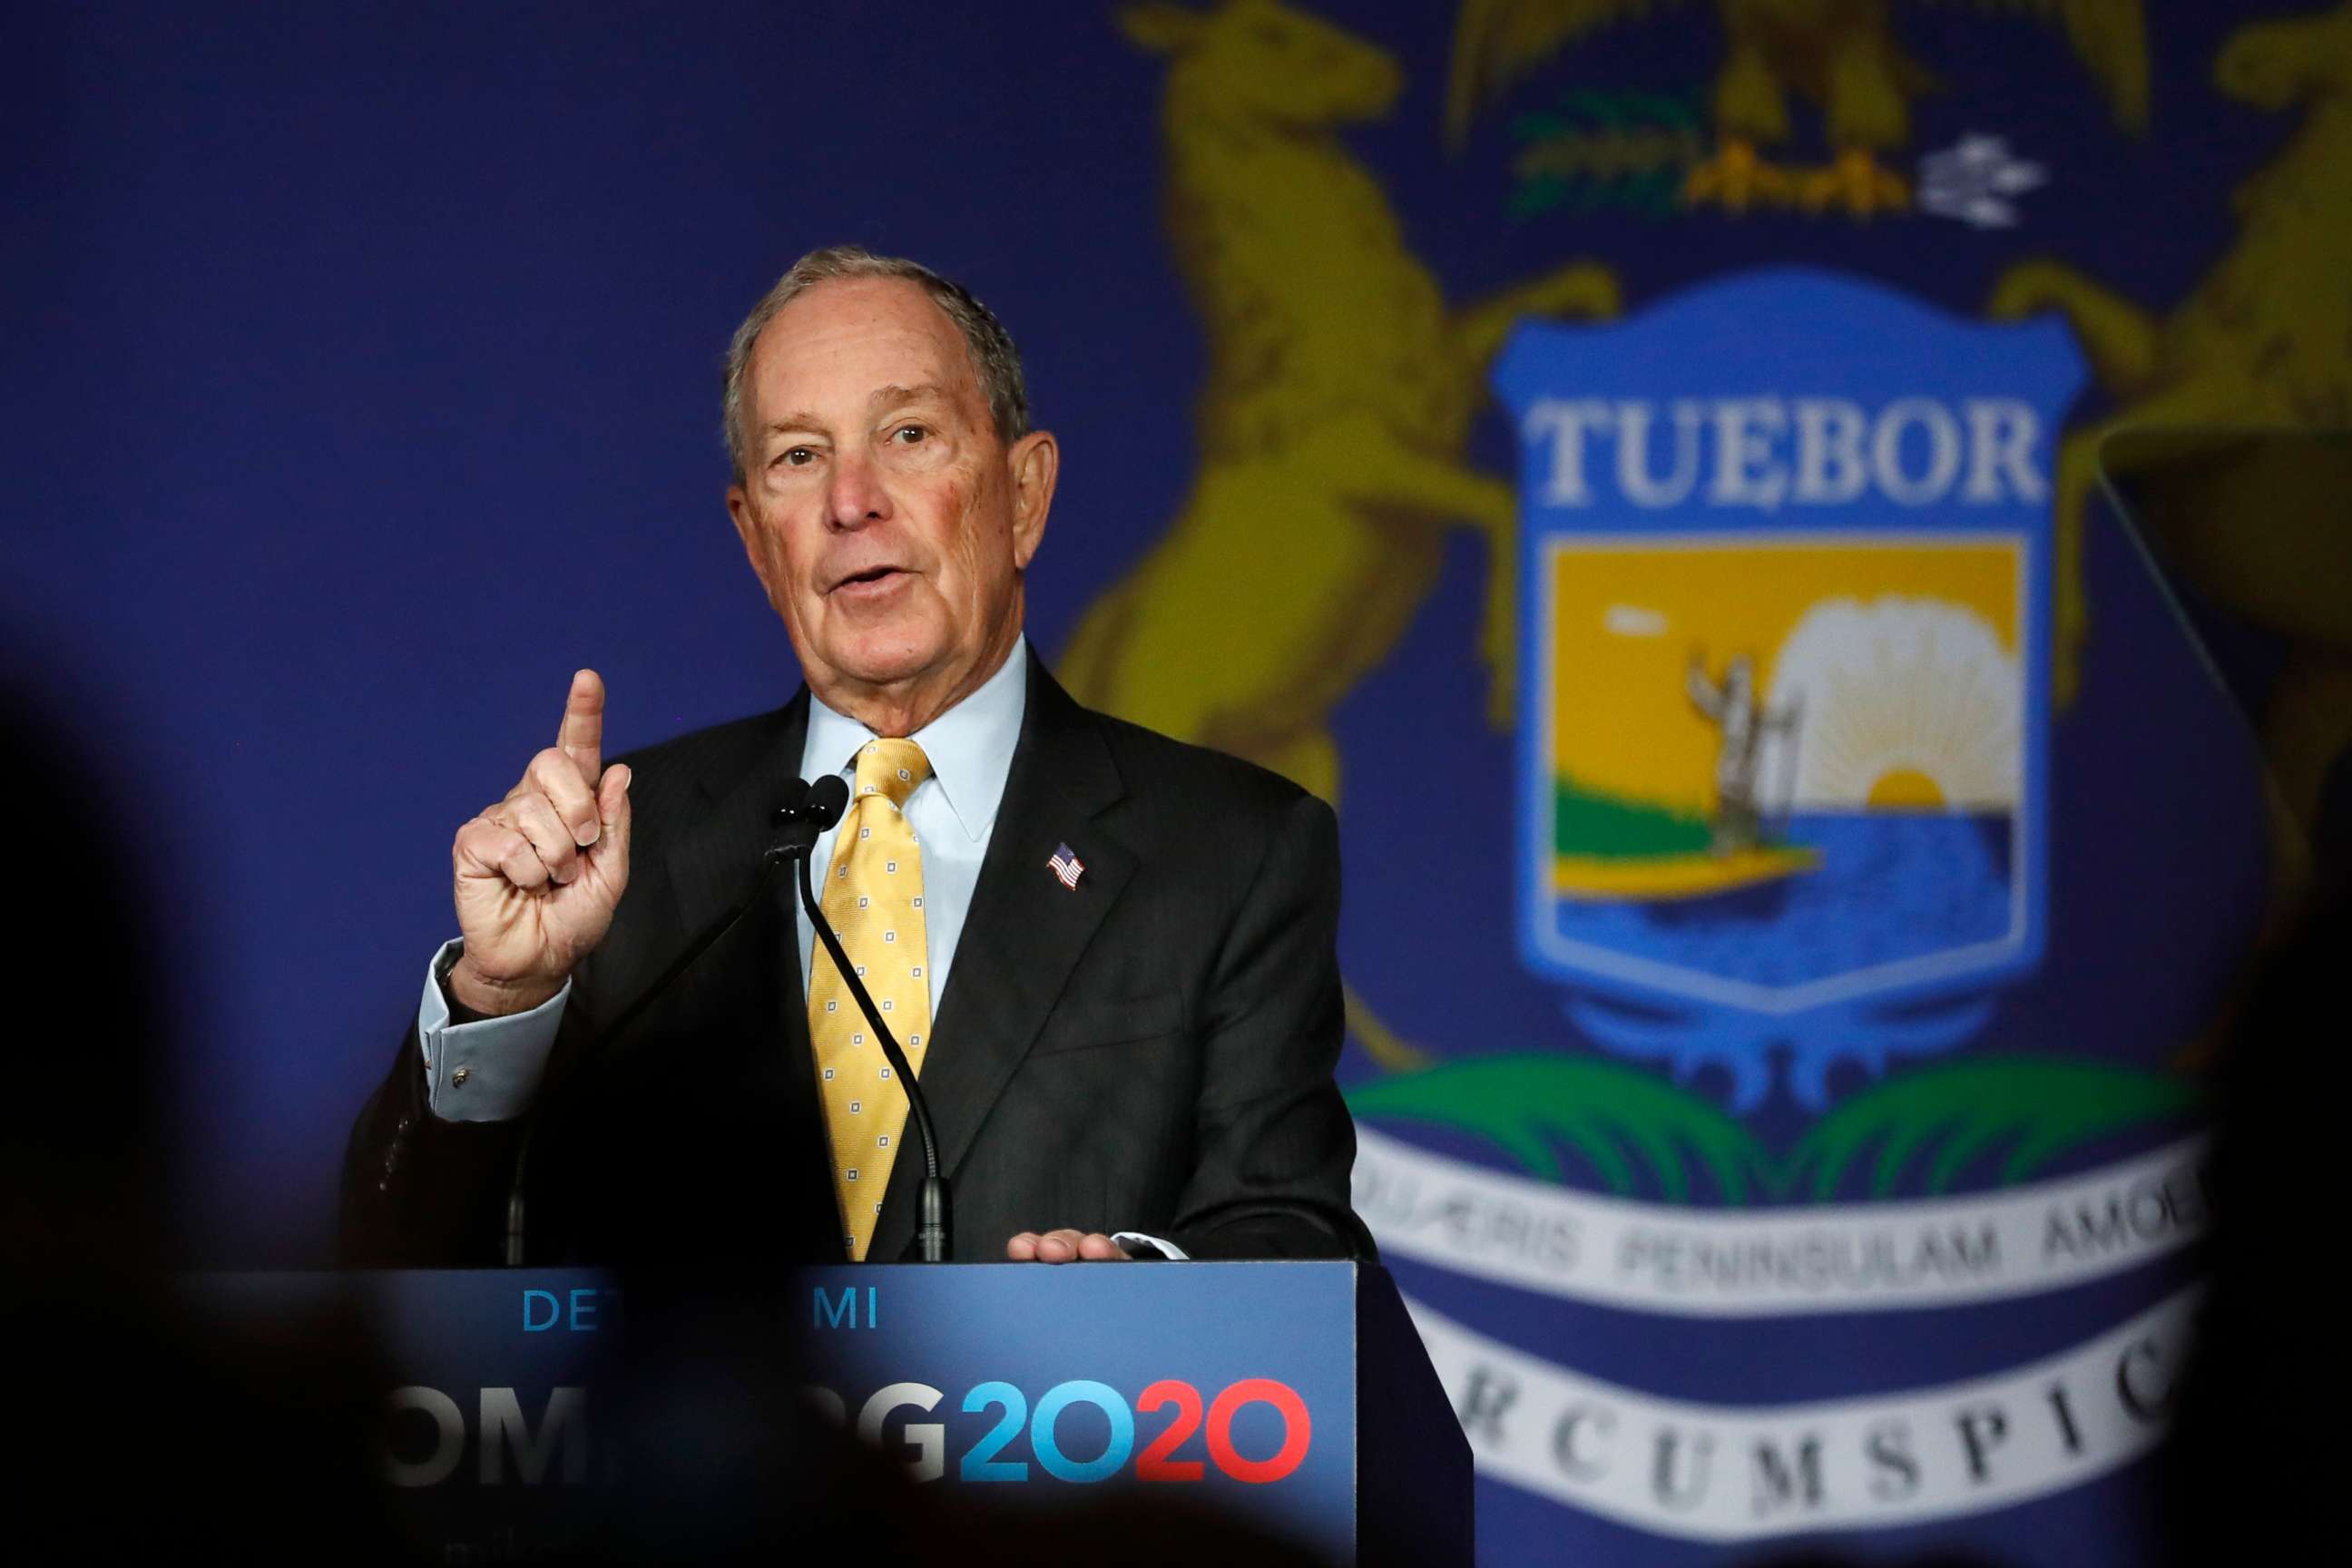 PHOTO: Democratic presidential candidate and former New York City Mayor Michael Bloomberg talks to supporters Tuesday, Feb. 4, 2020 in Detroit.